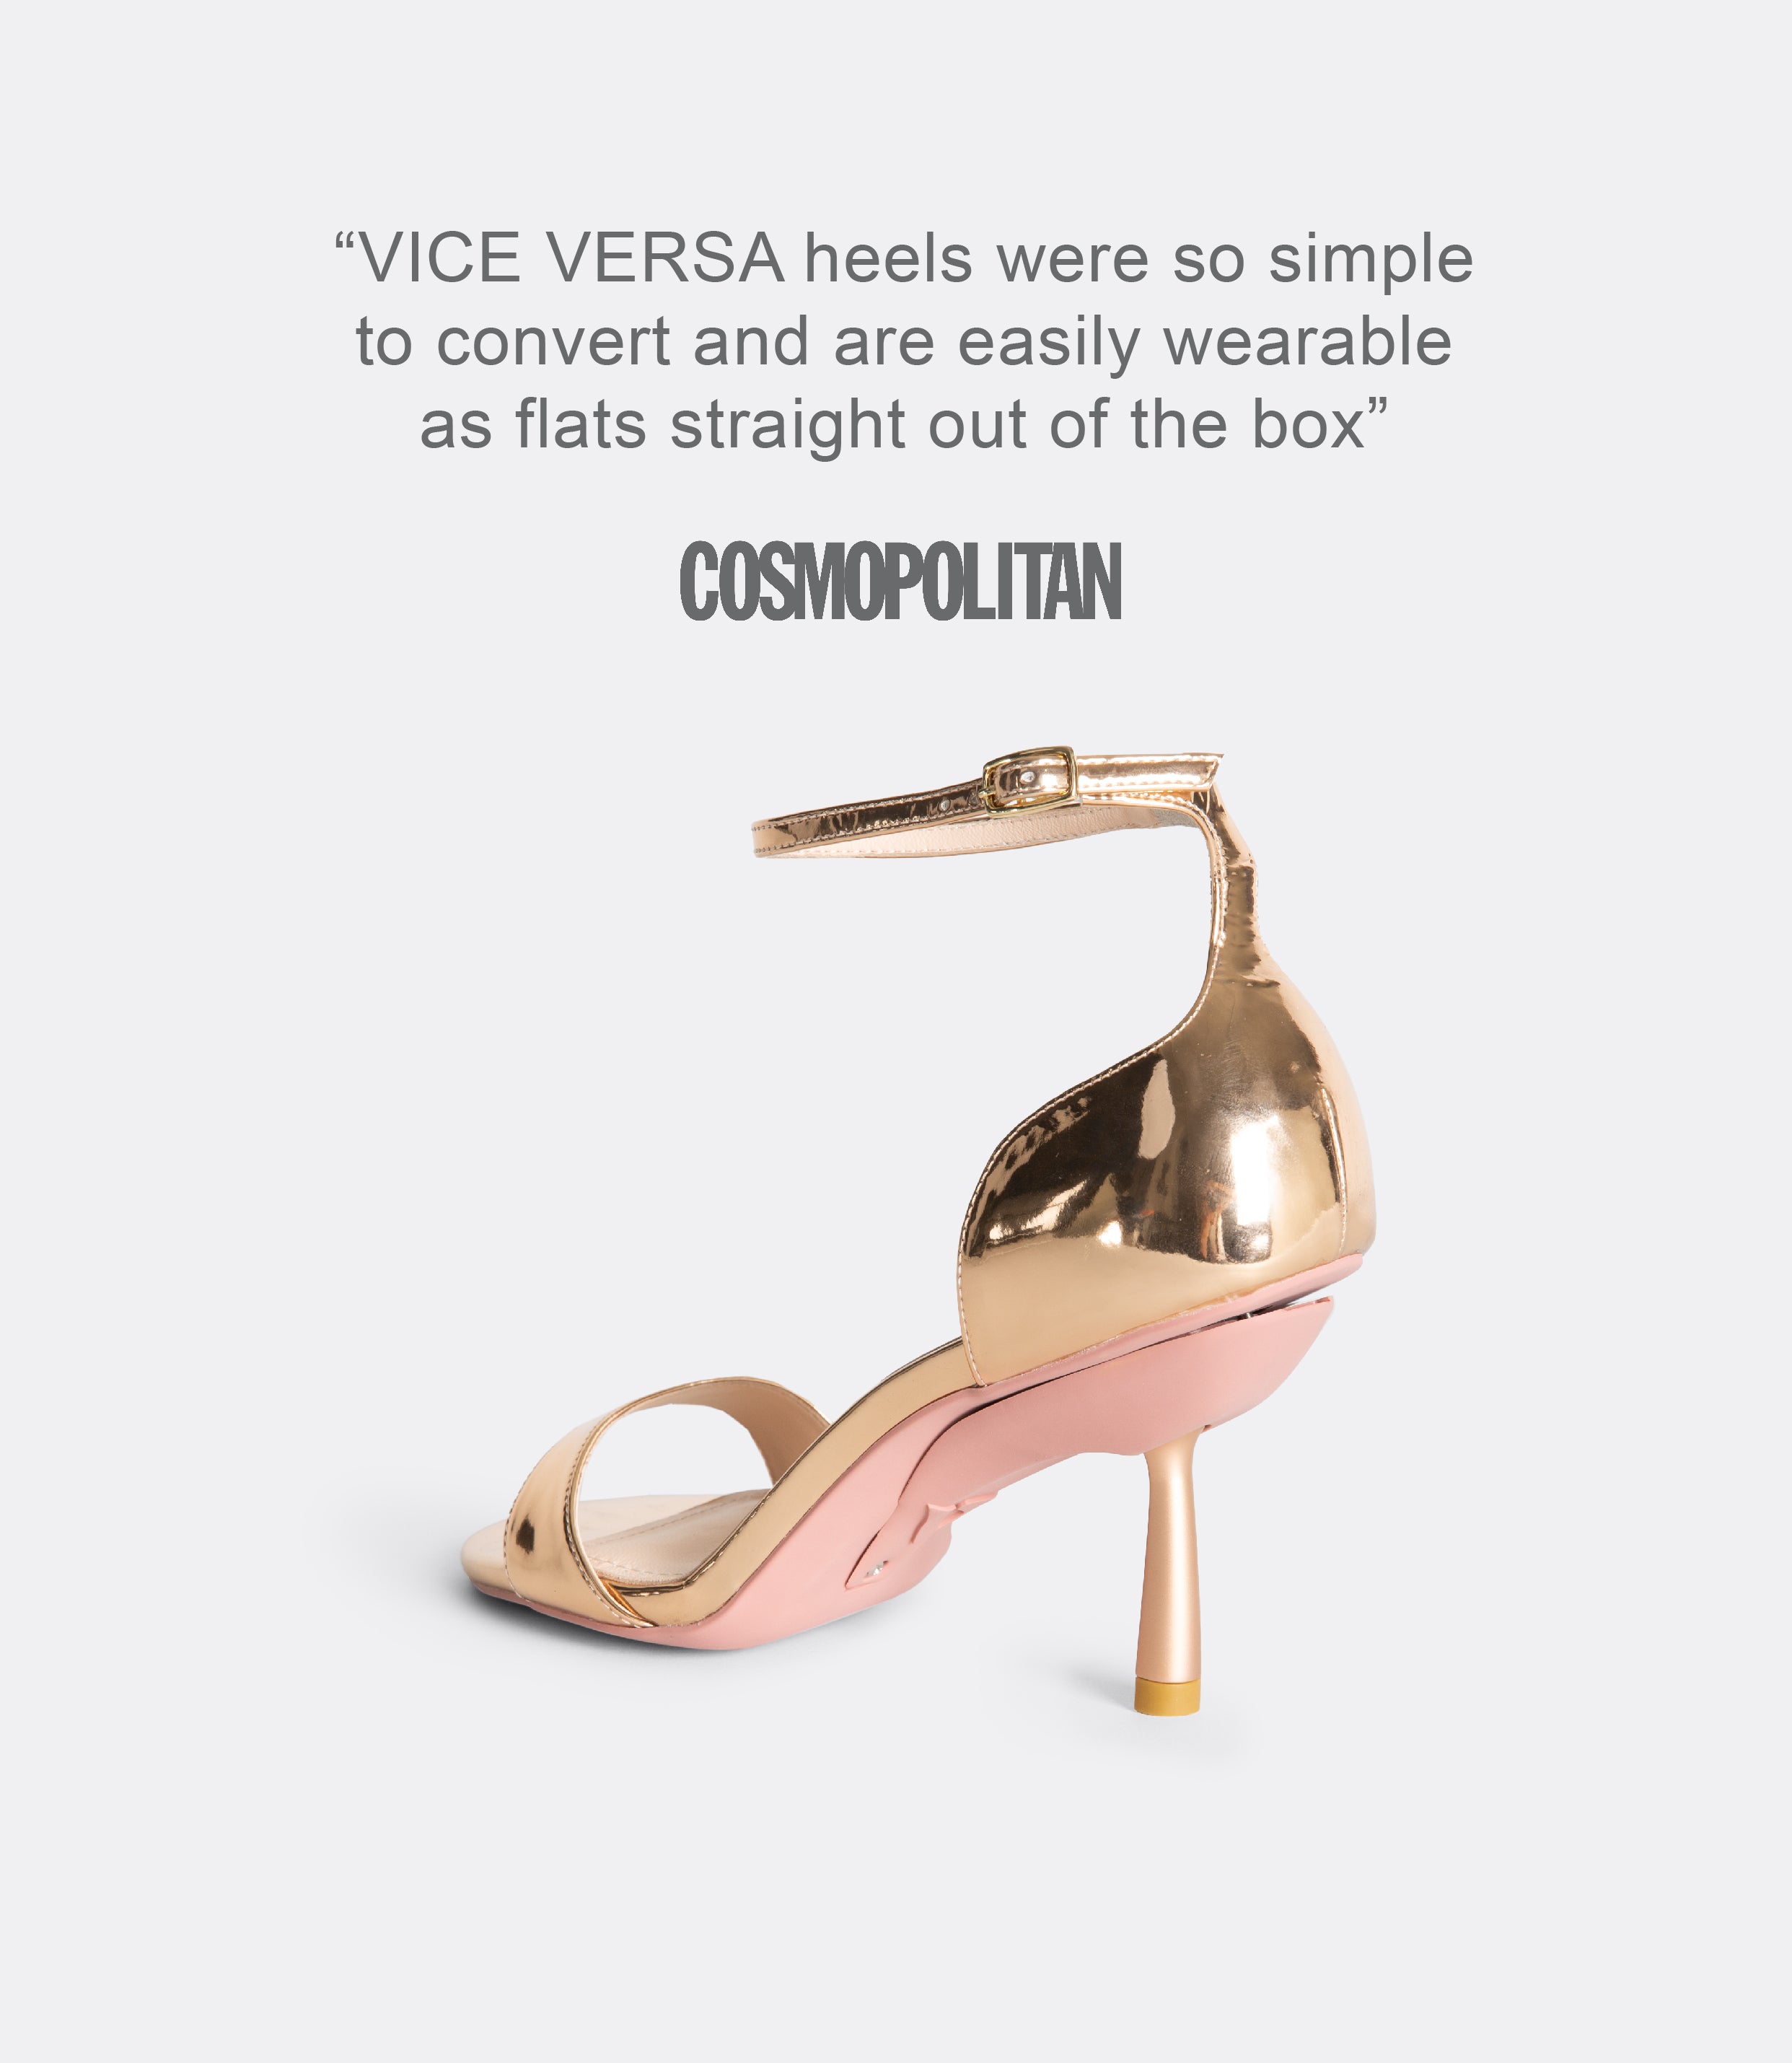 A quote from Cosmopolitan and a back view of the rose gold editor sandal.